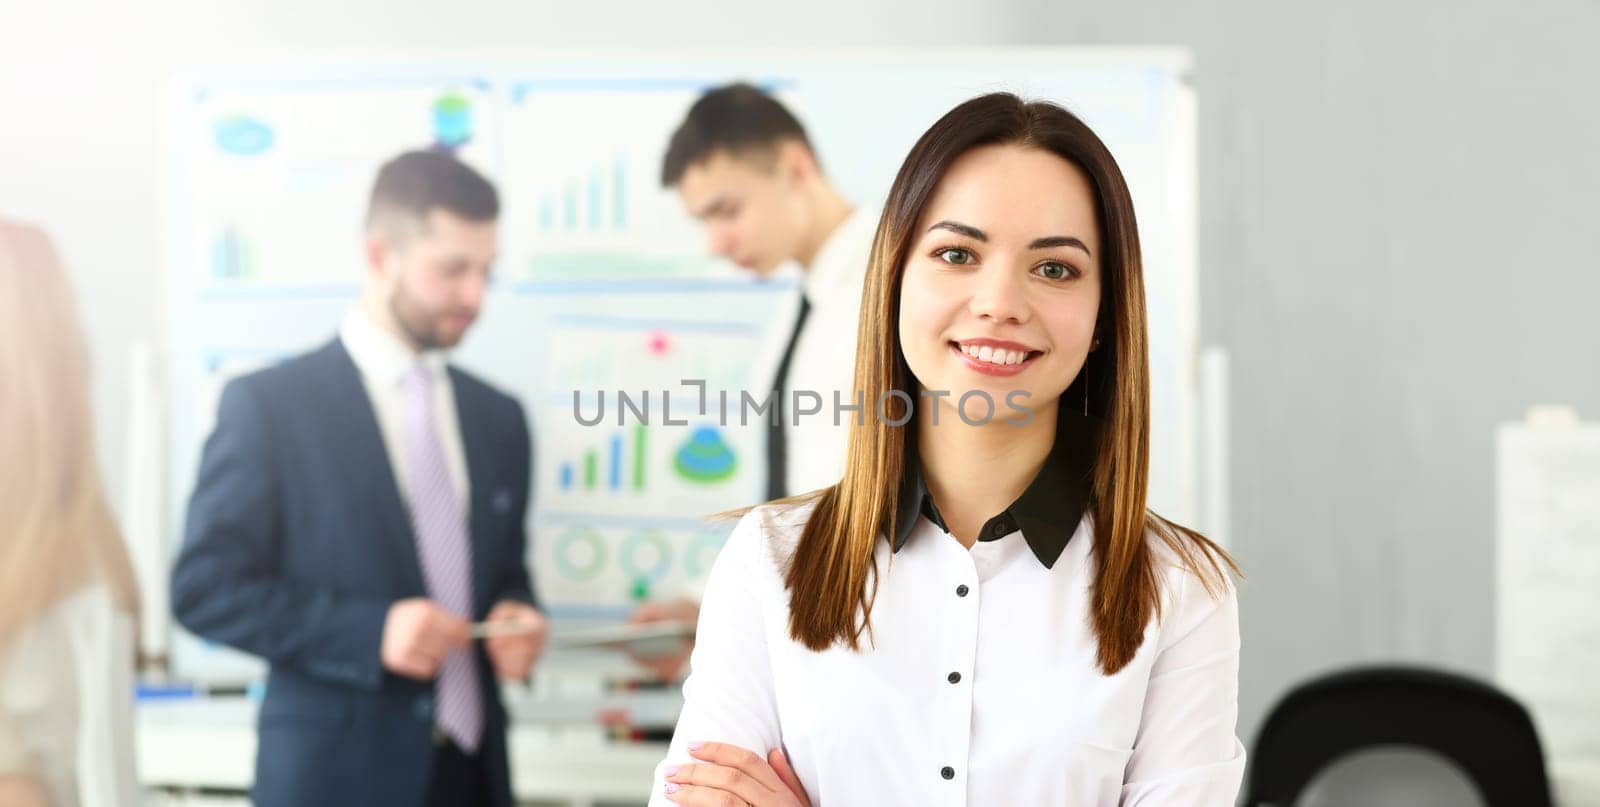 Portrait of beutiful female working on intense business project. Smart woman discussing questionable subject with witty colleagues. Company meeting concept